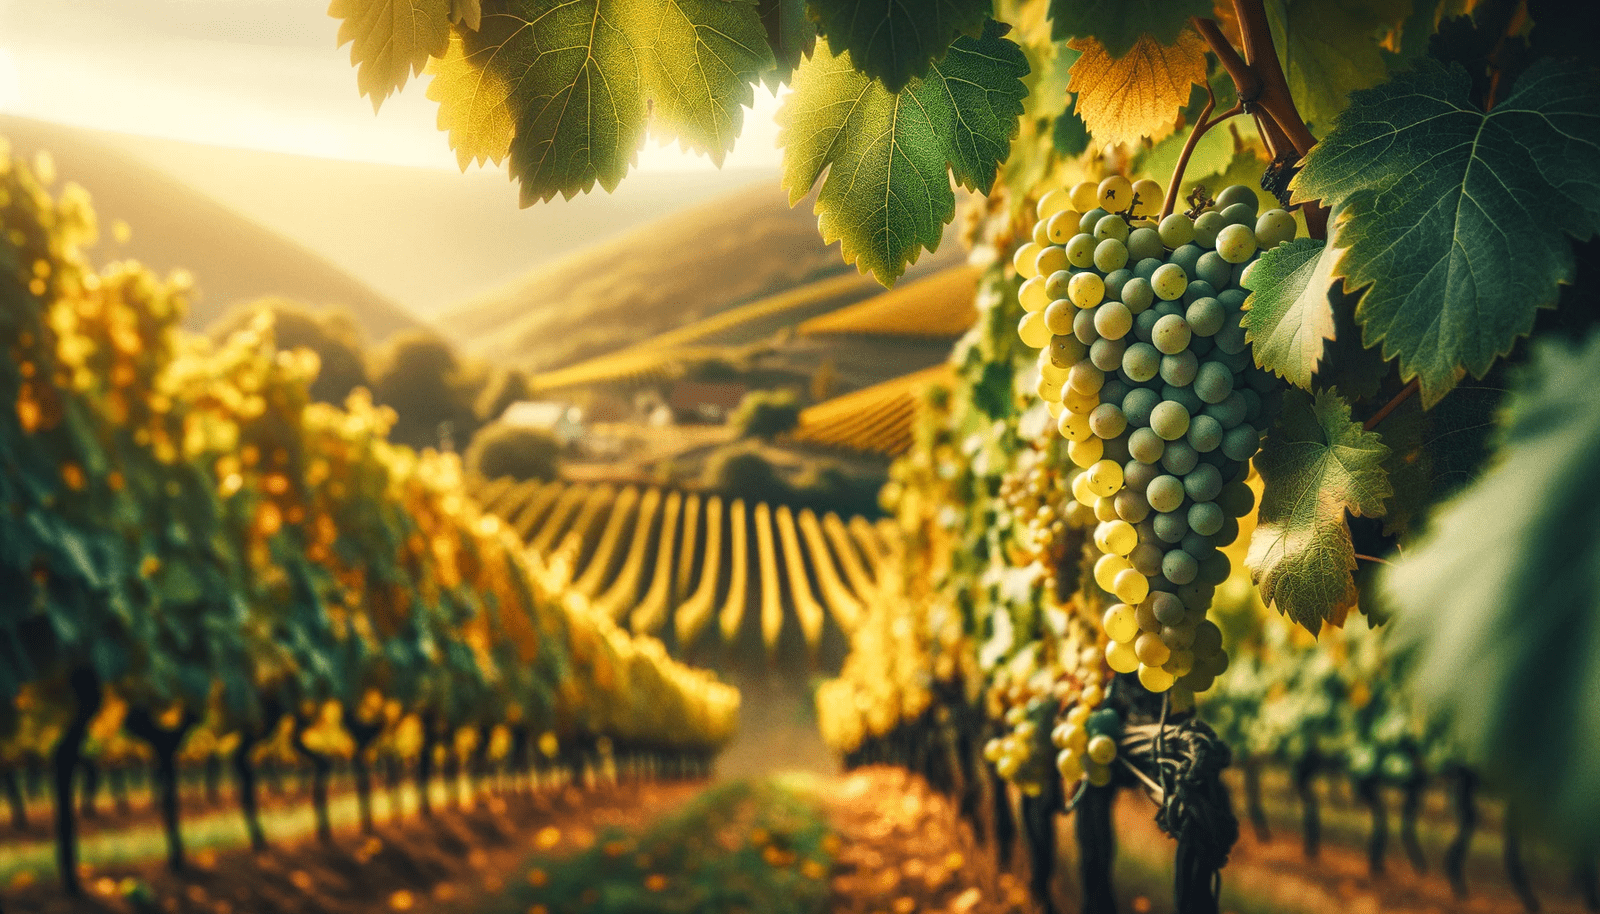 Cinematic image of a Riesling vineyard during early autumn